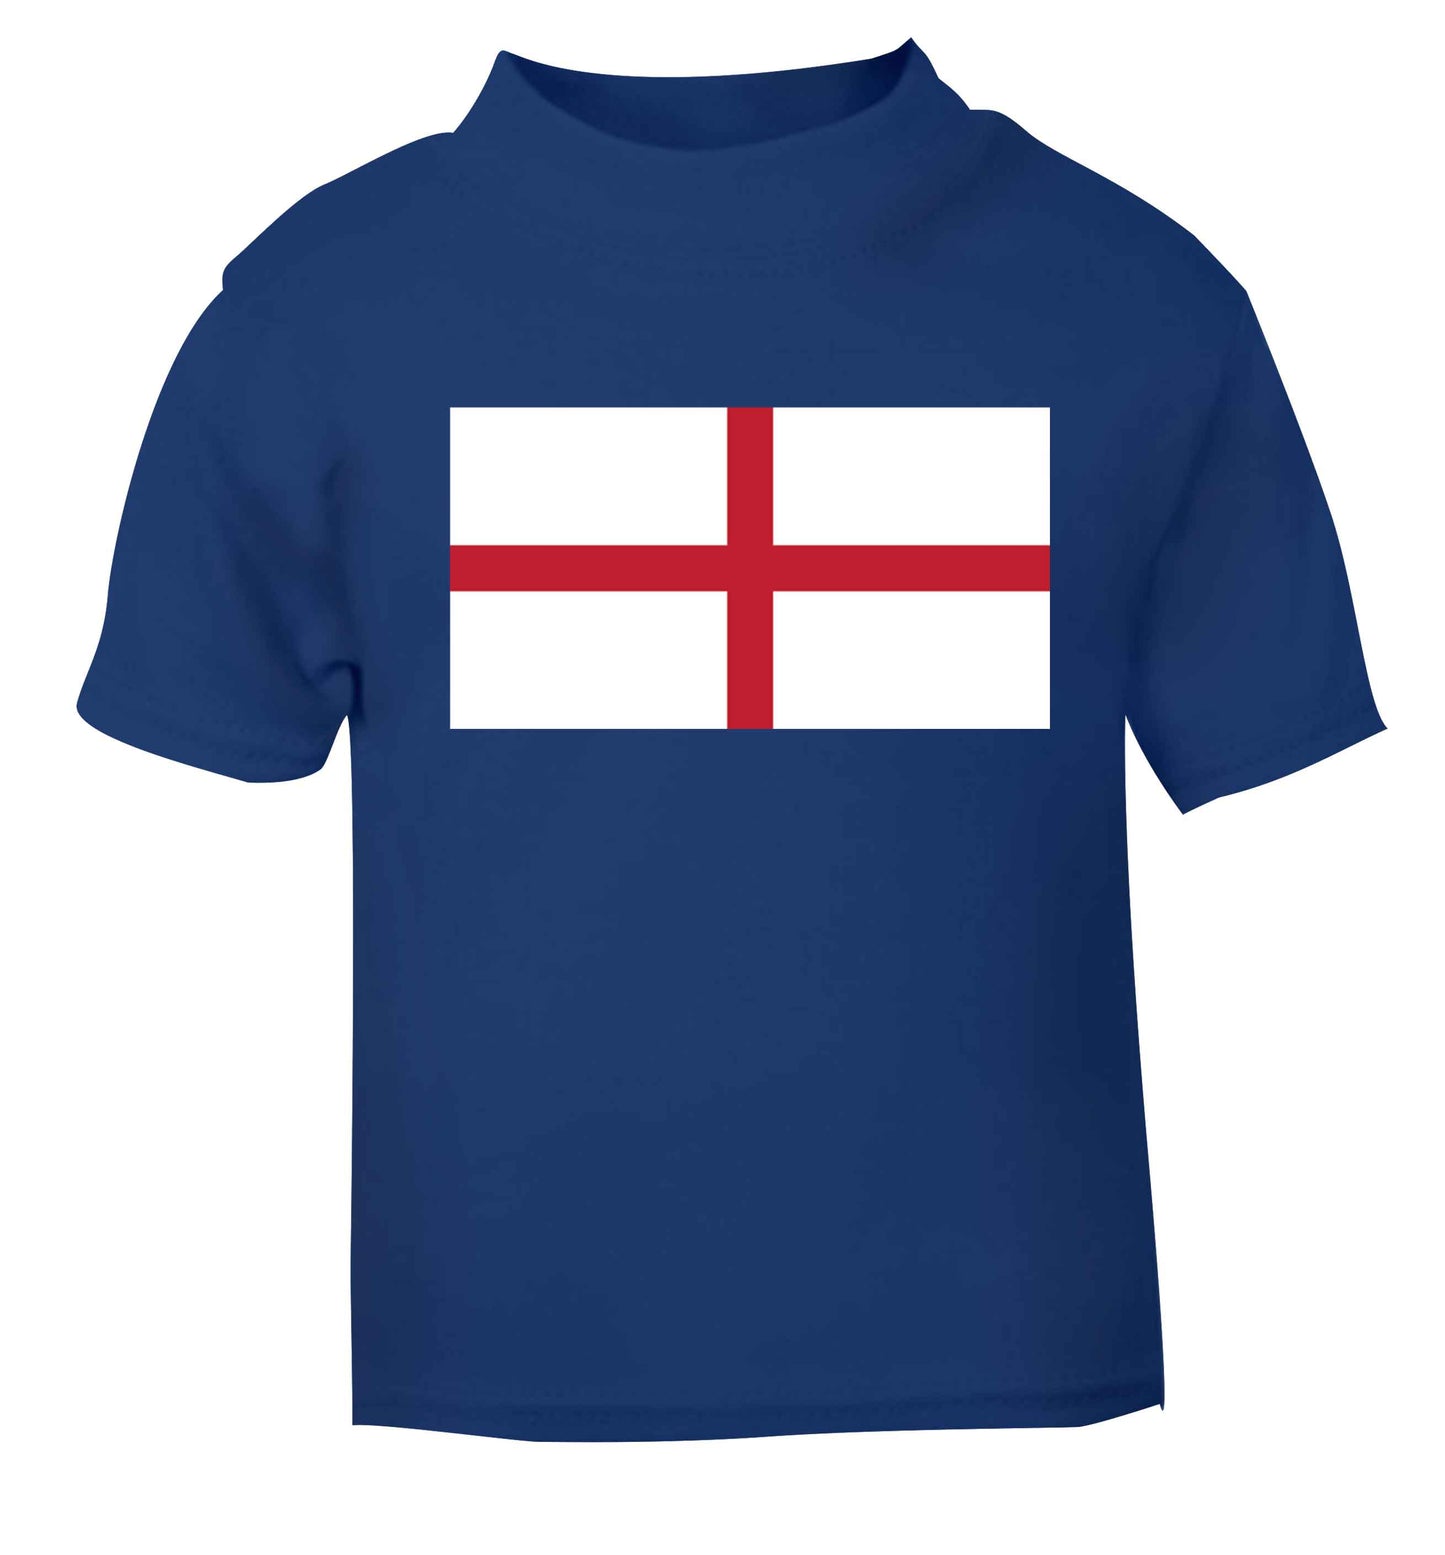 England Flag blue baby toddler Tshirt 2 Years